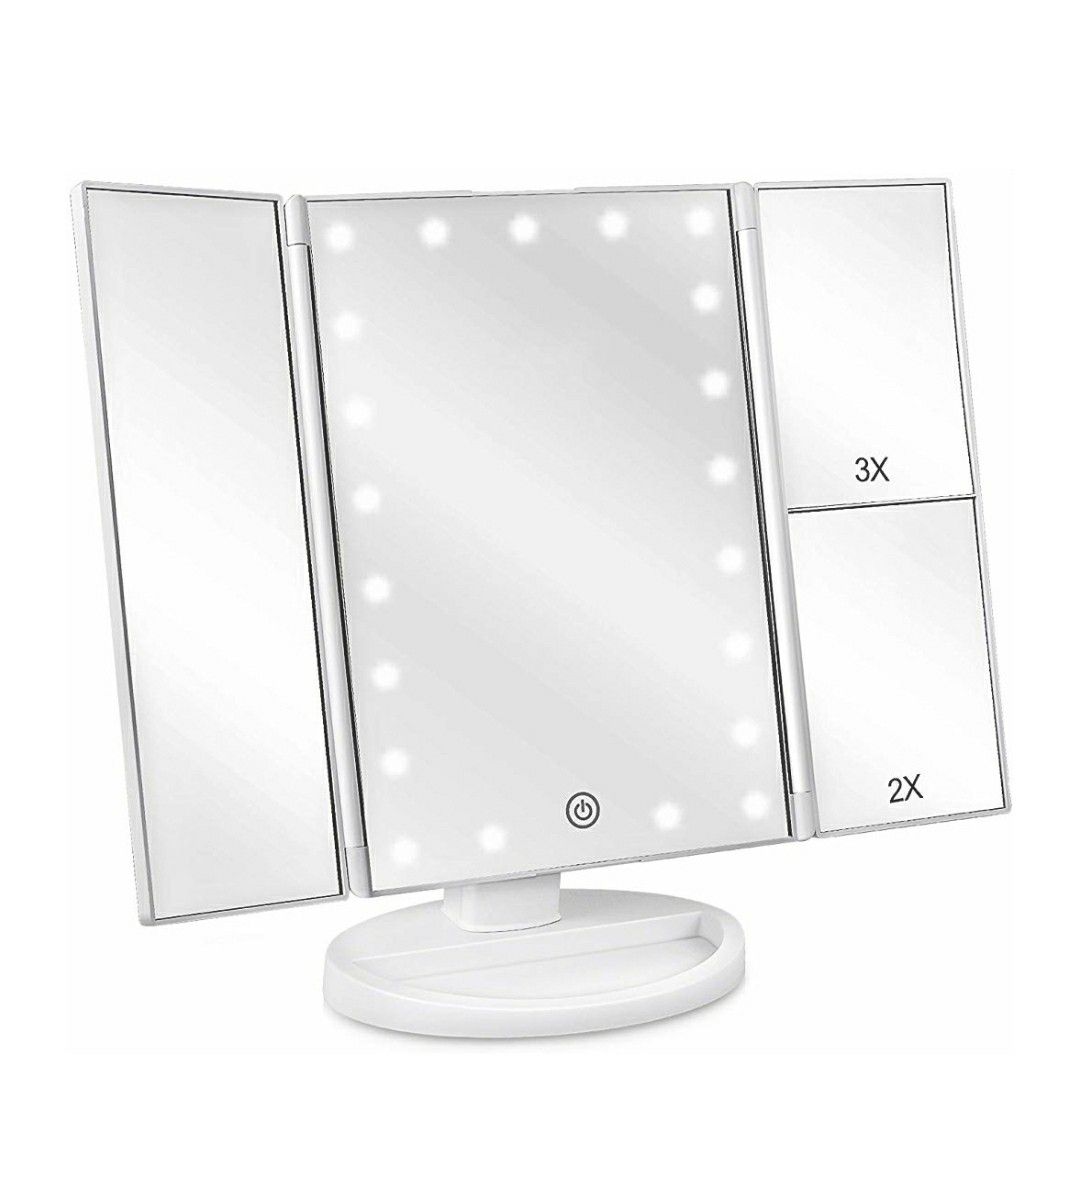 Makeup Vanity Mirror with Lights, 2X/3X Magnification, 21 Led Lighted Mirror with Touch Screen,180° Adjustable Rotation,Dual Power Supply